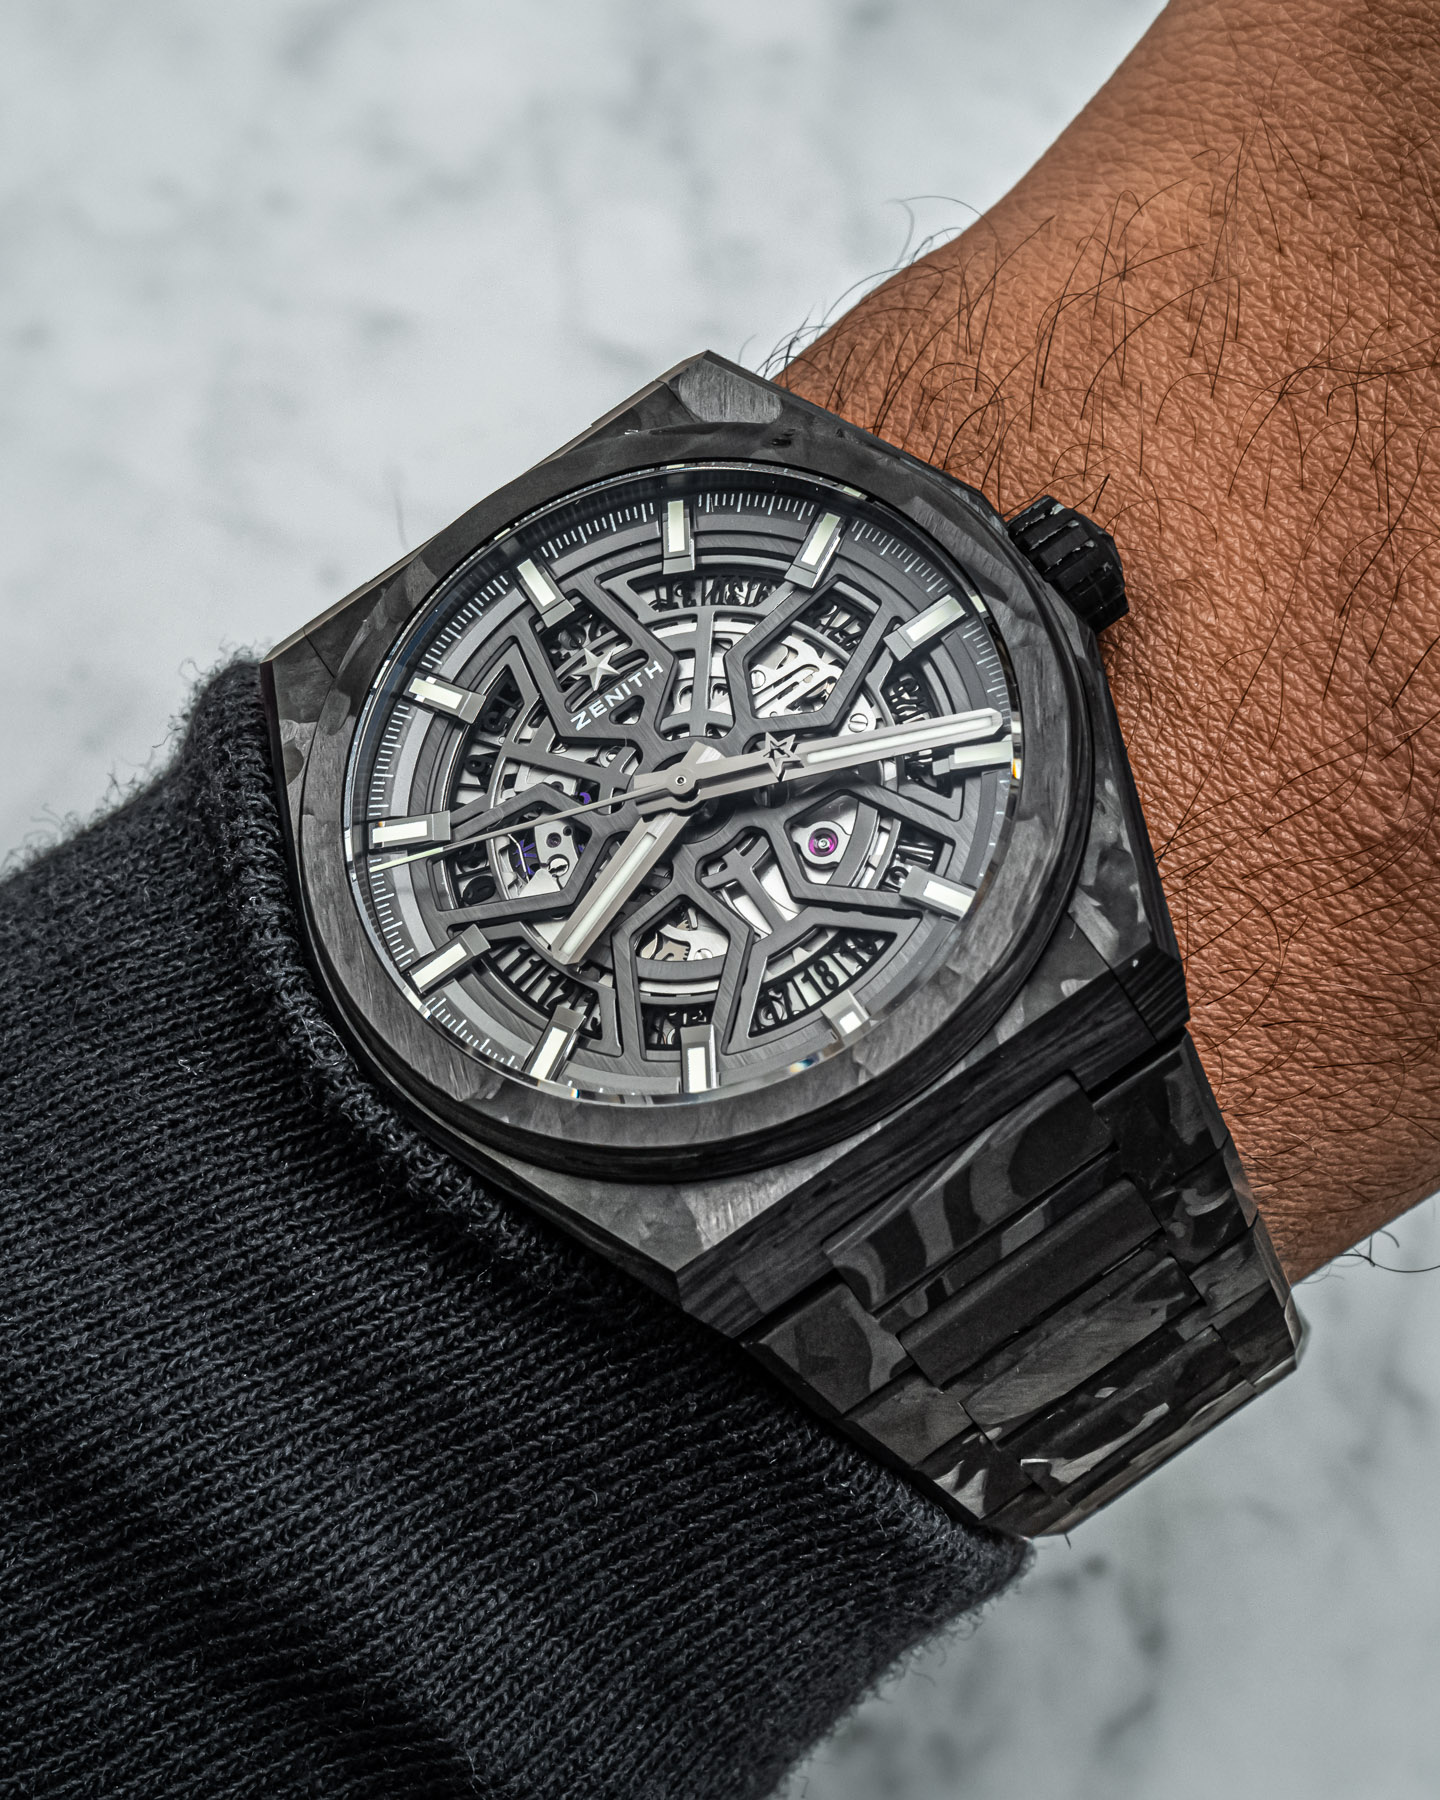 Zenith Defy Classic Carbon Fake Watch Introduces All-Carbon Fiber Case And Integrated Bracelet